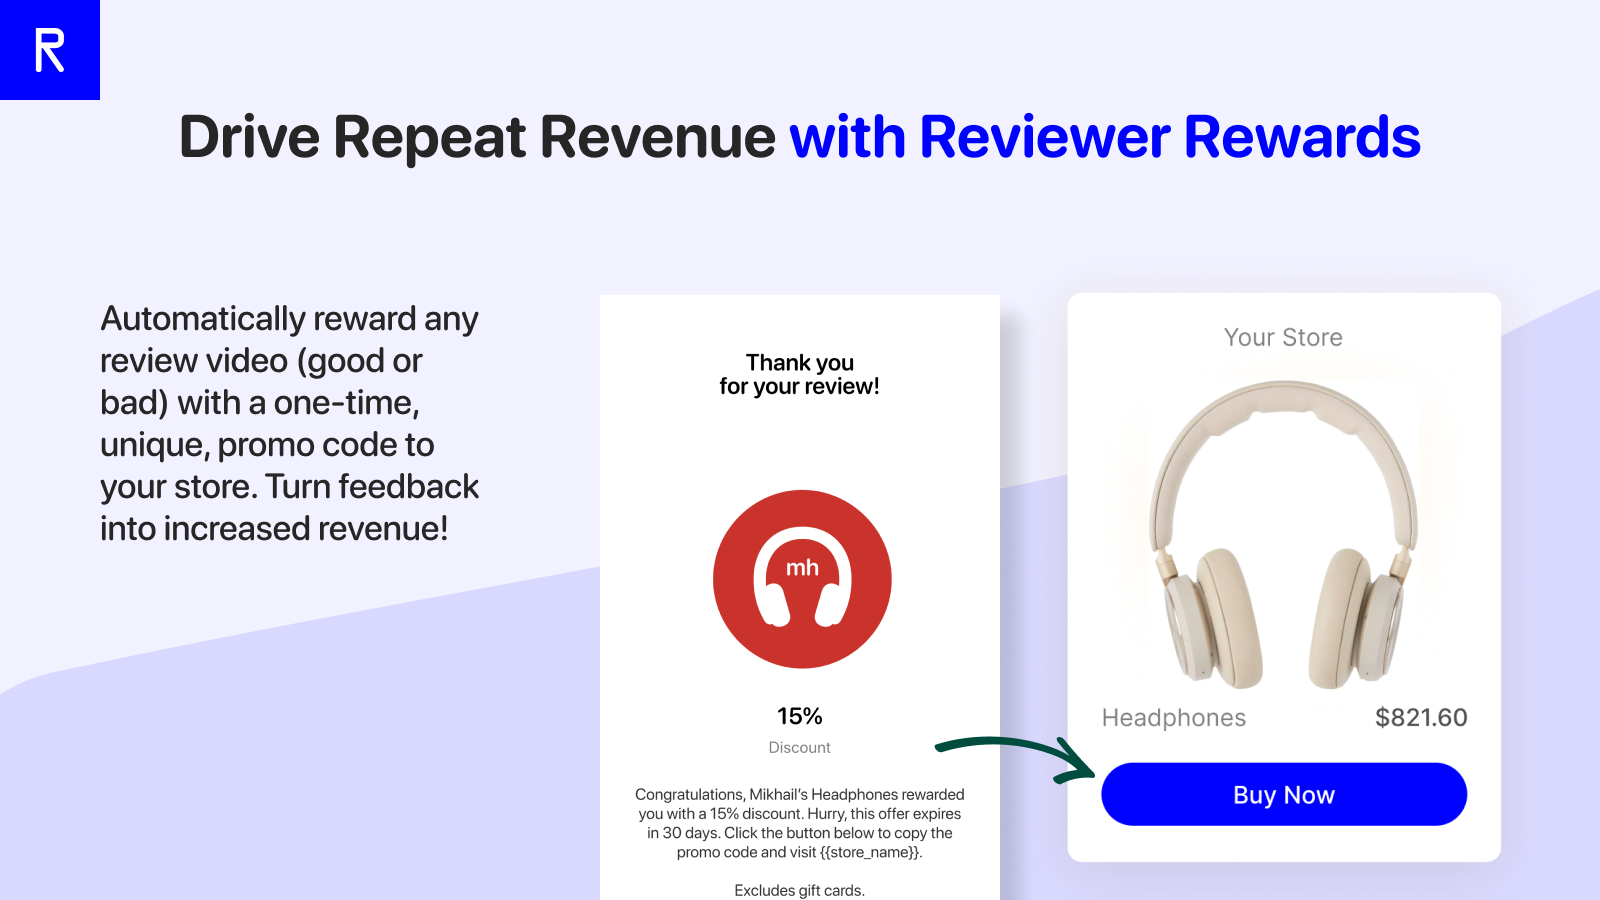 Drive Repeat Business by Rewarding Reviewers!